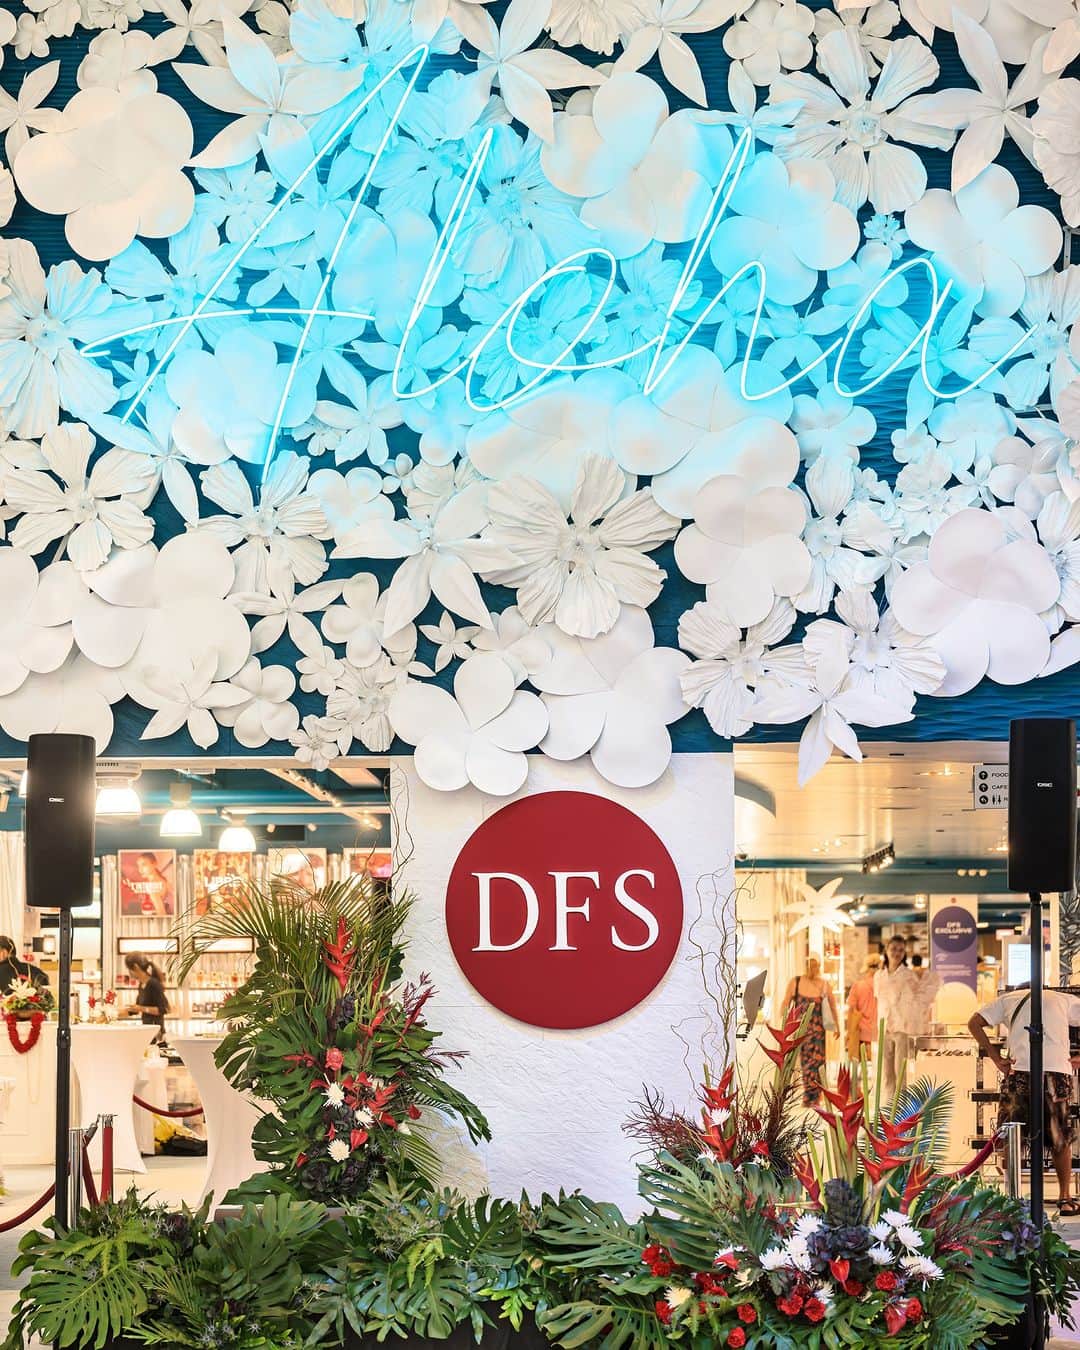 DFS & T Galleriaのインスタグラム：「DFS Waikiki’s reopening celebrates our 60-year-strong relationship with the Waikiki community.​  Committed to creating lasting employment opportunities in Hawaii, DFS Waikiki boasts a reopening team 90% consisting of DFS Hawaii alumni, including management staff who have been with DFS for over 45 years. ​  Visit DFS Waikiki to meet the team and hear their incredible stories!  #DFSOfficial #DFSHawaii #DFSWaikiki​ #AlohaWeAreBack #TheNewWaveofLuxury​ #Hawaii #Waikiki」